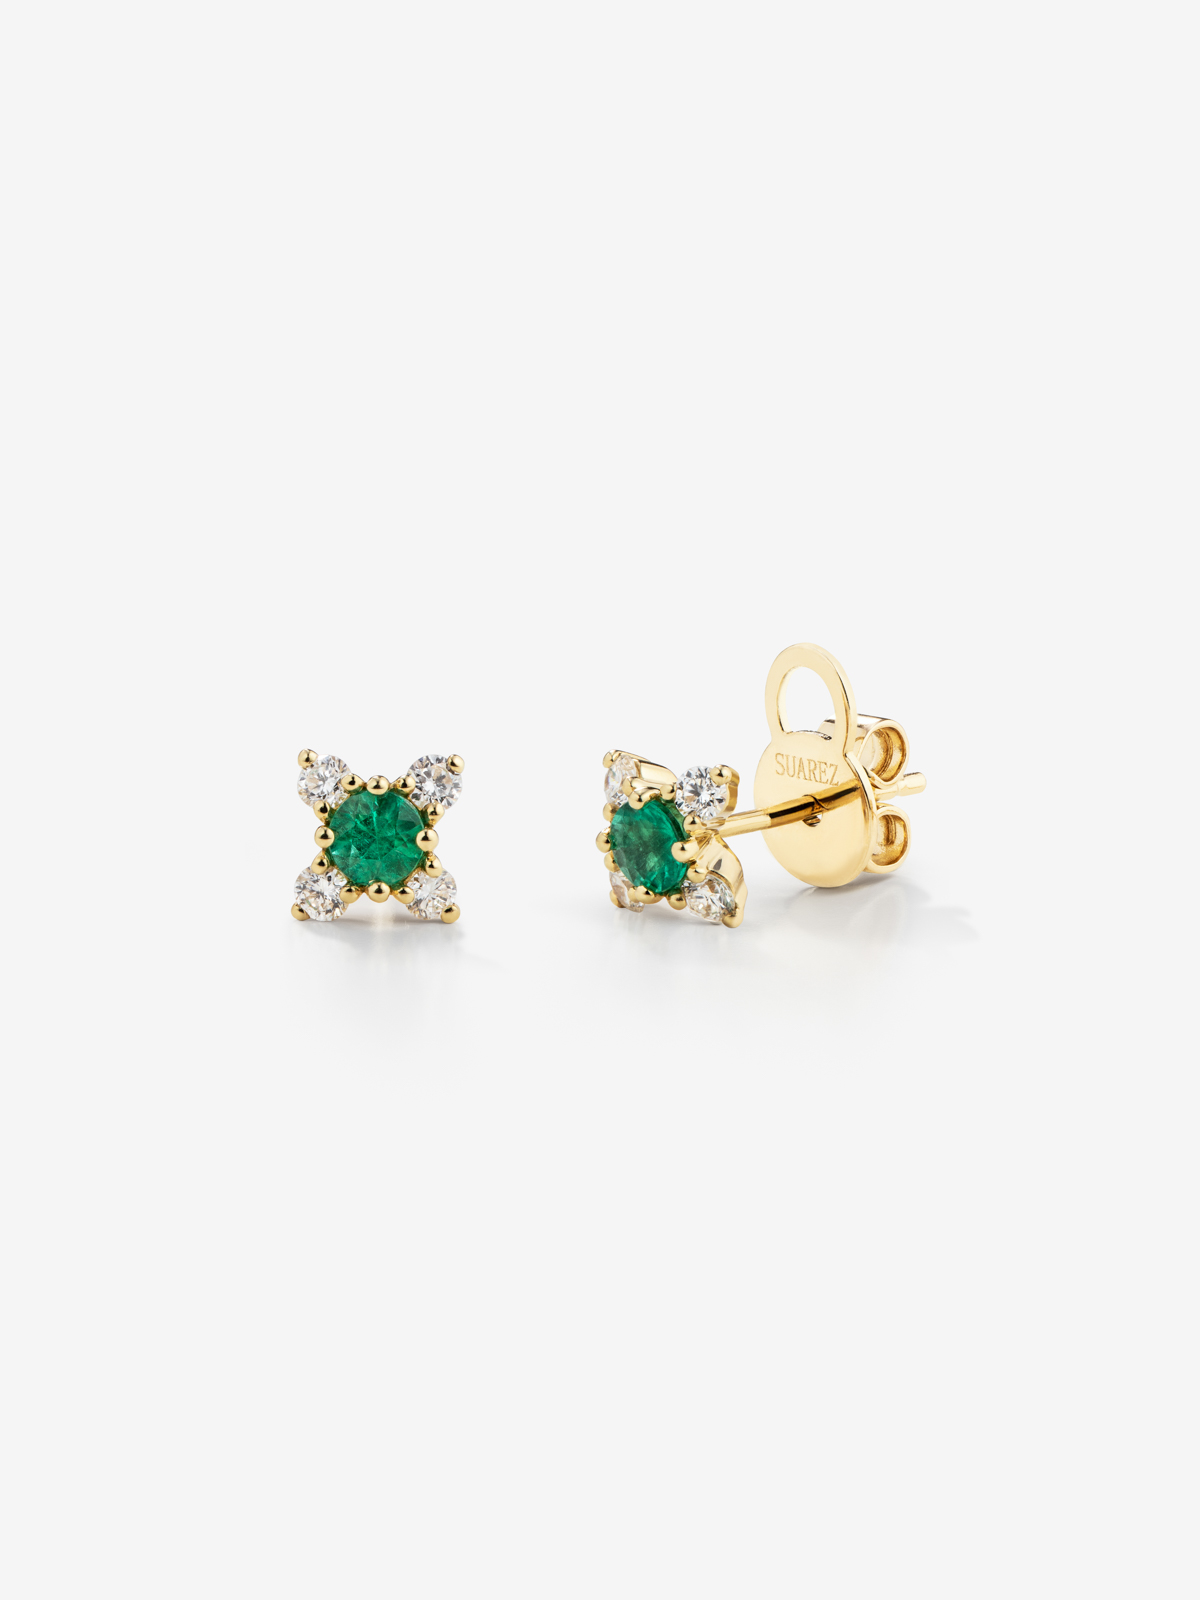 Individual 18K yellow gold flower earring with emerald and diamonds.